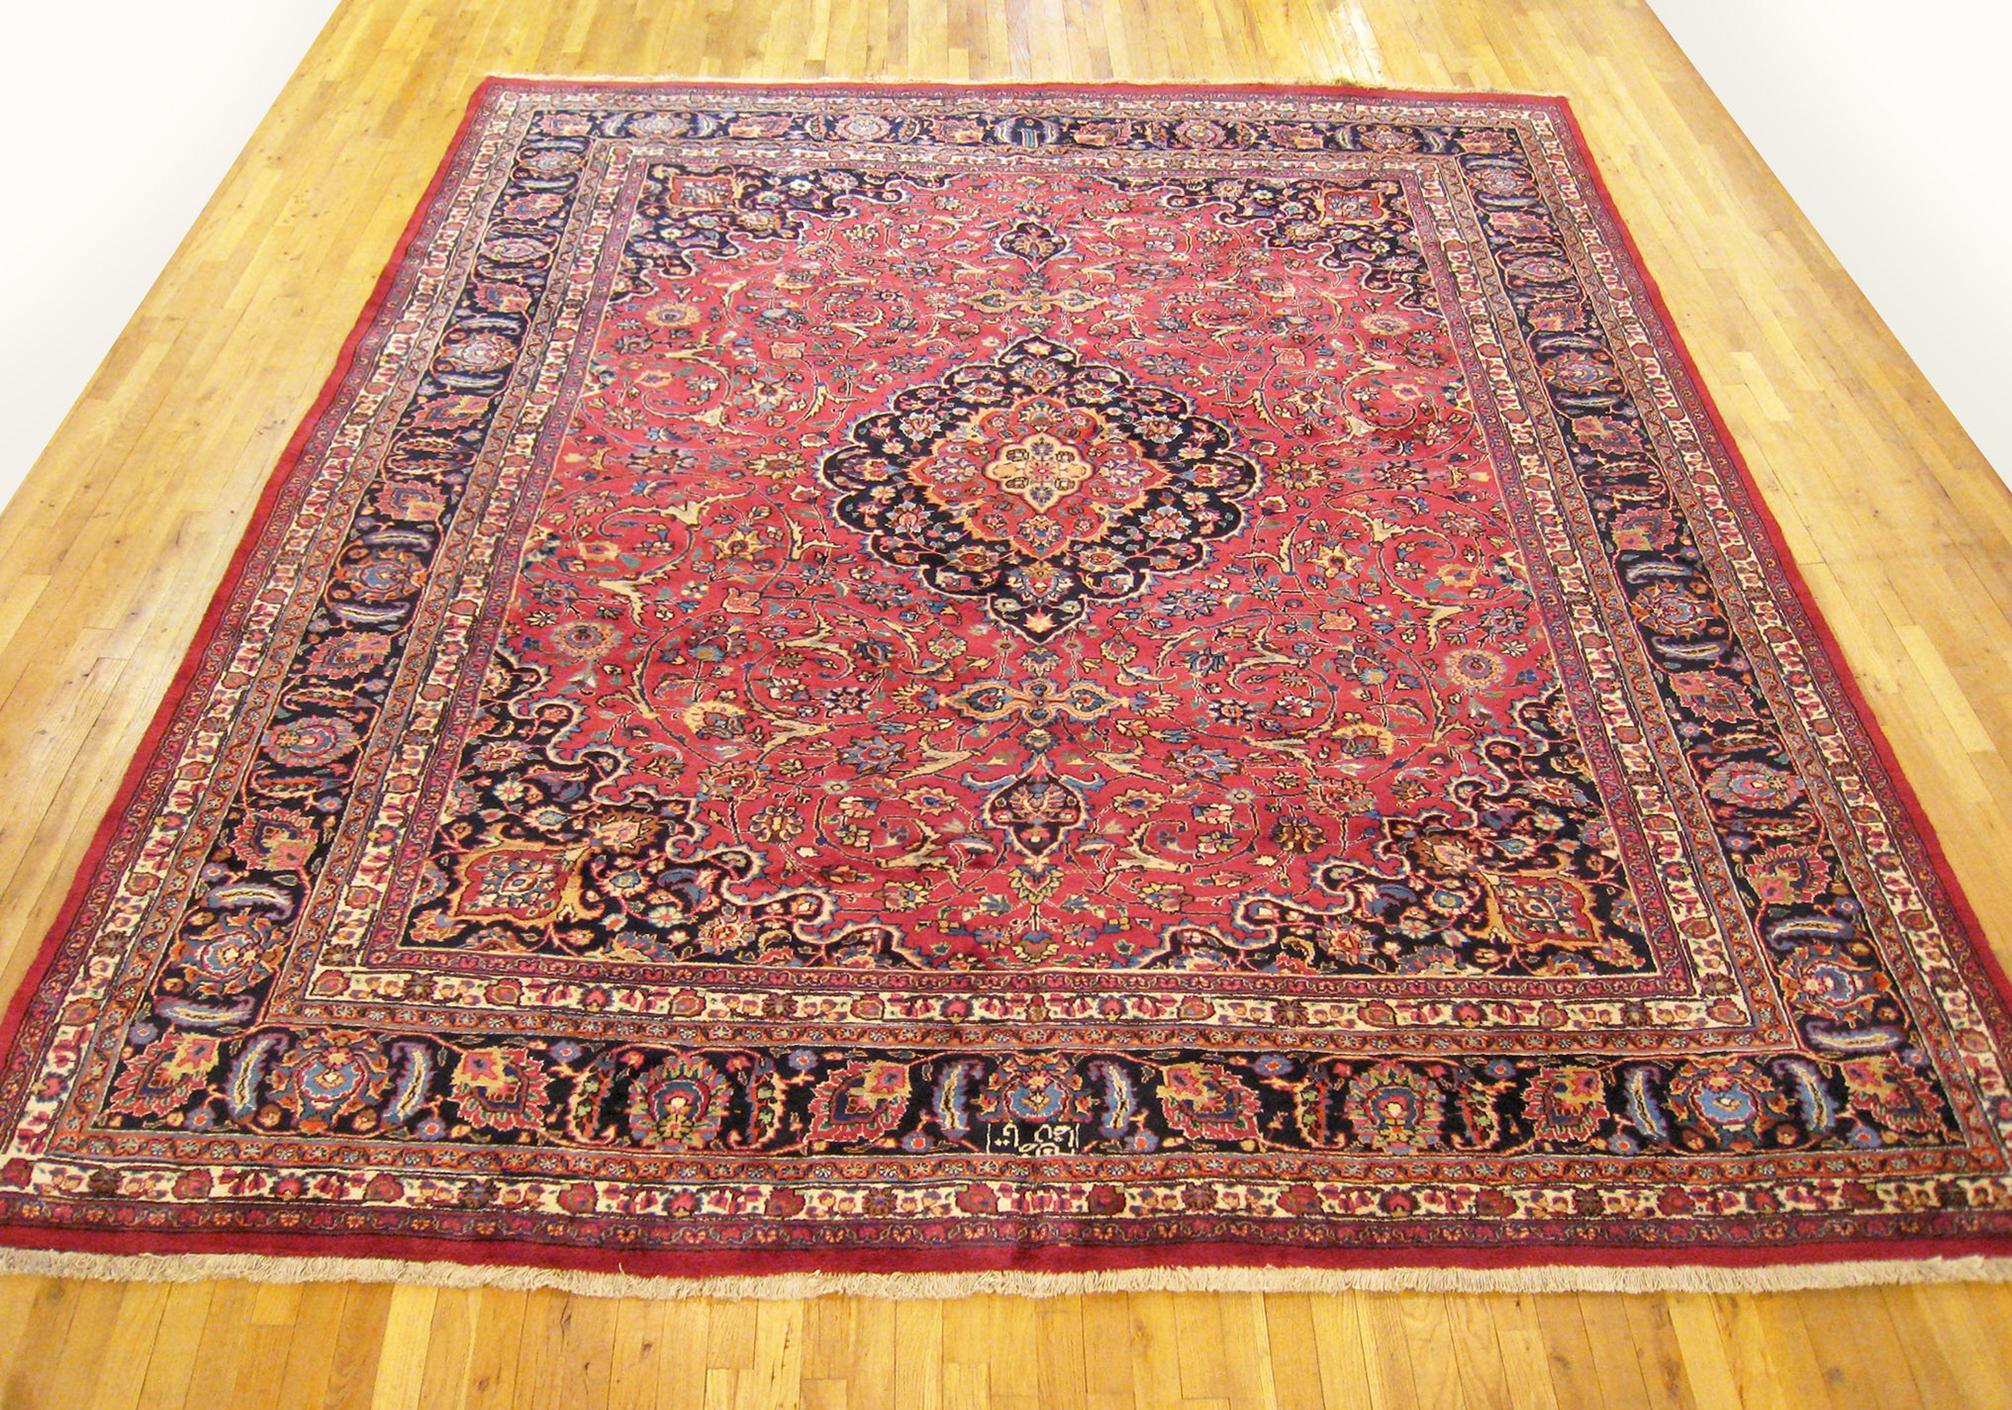 Vintage Persian Meshed Oriental Rug, Room size

A vintage Persian Meshed oriental rug, size 12'0 x 9'10, circa 1940.  This handsome hand-woven geometric rug features a central medallion with floral elements allover the red field.  The central field